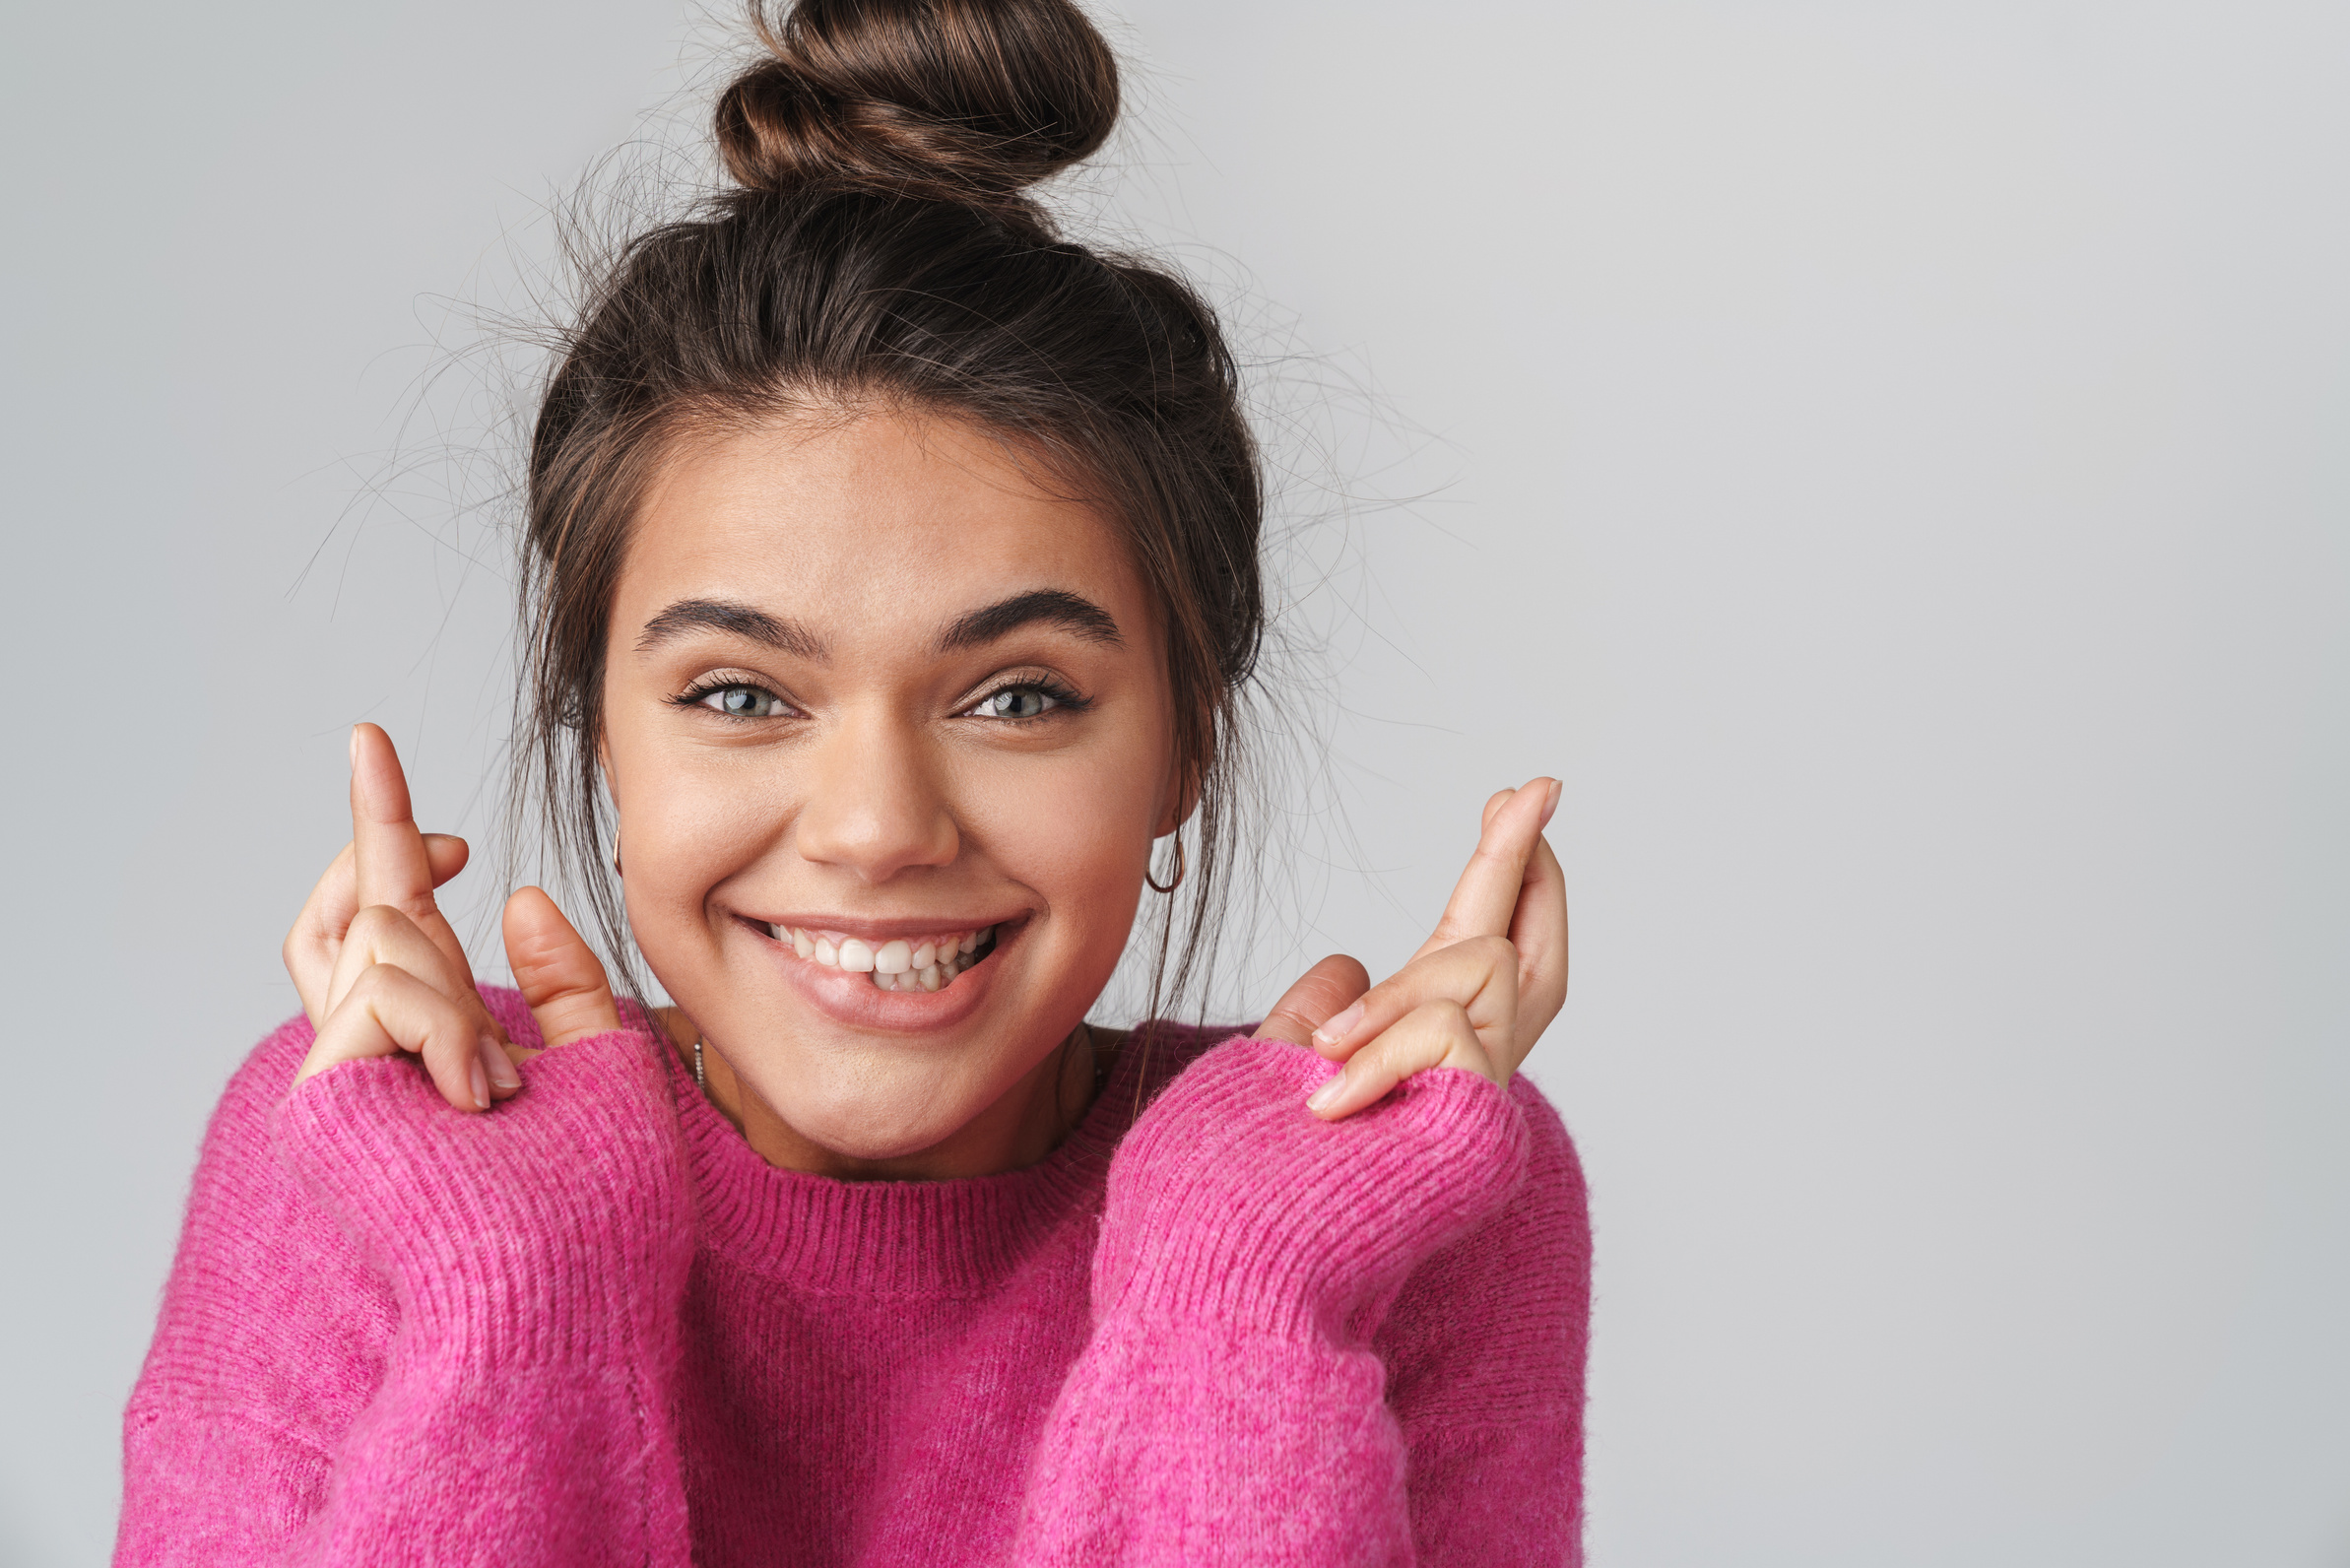 Woman Smiling with Fingers Crossed